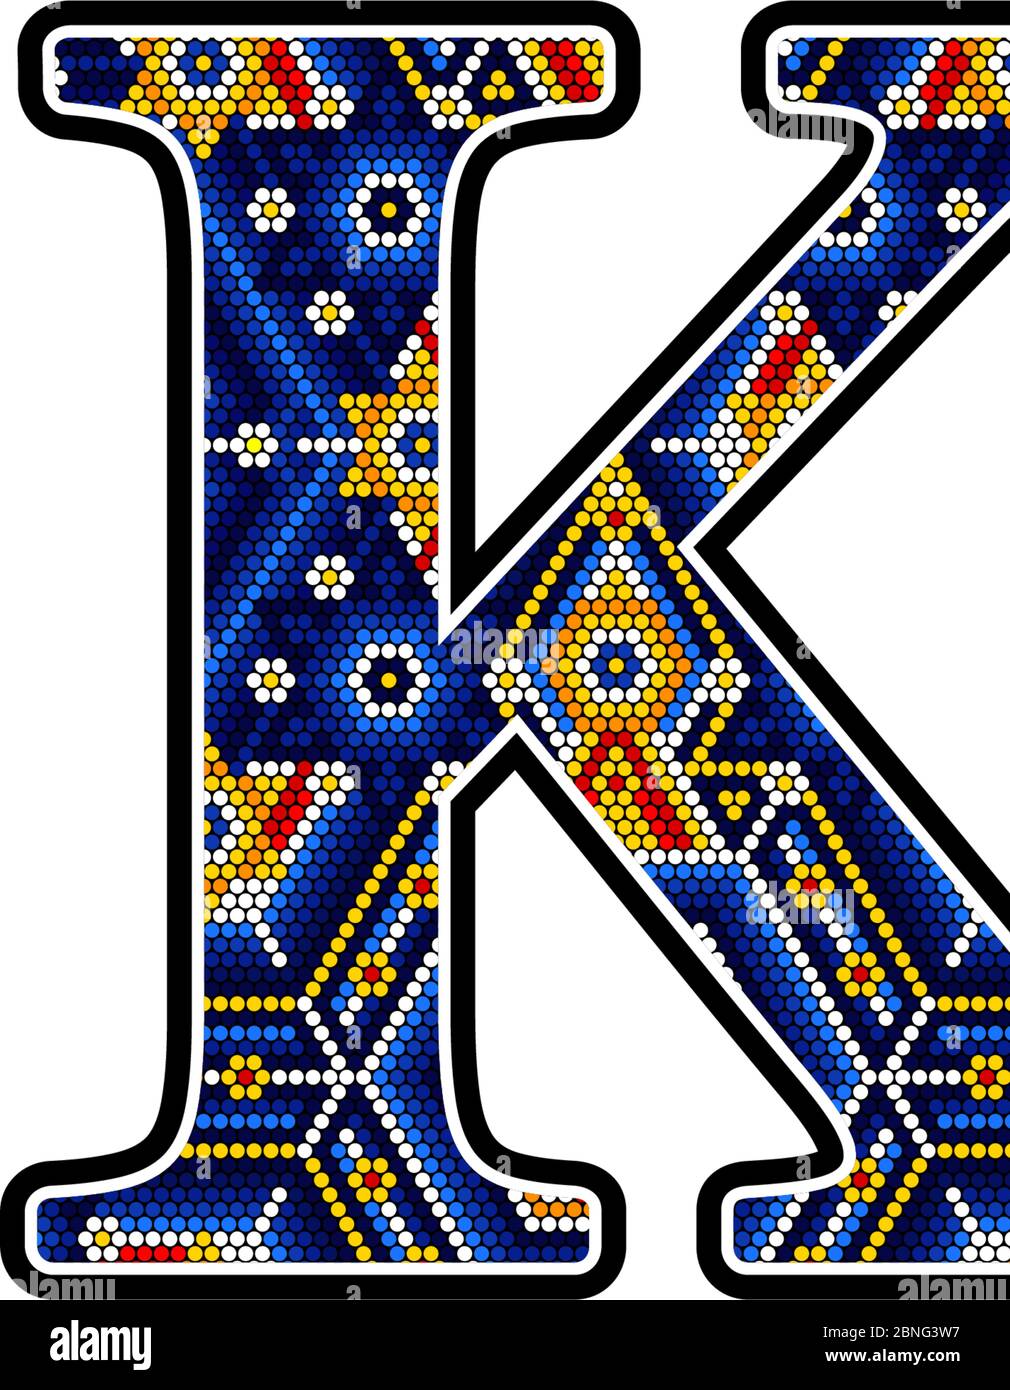 initial capital letter K with colorful dots. Abstract design inspired in mexican huichol craft art style. Isolated on white background Stock Vector